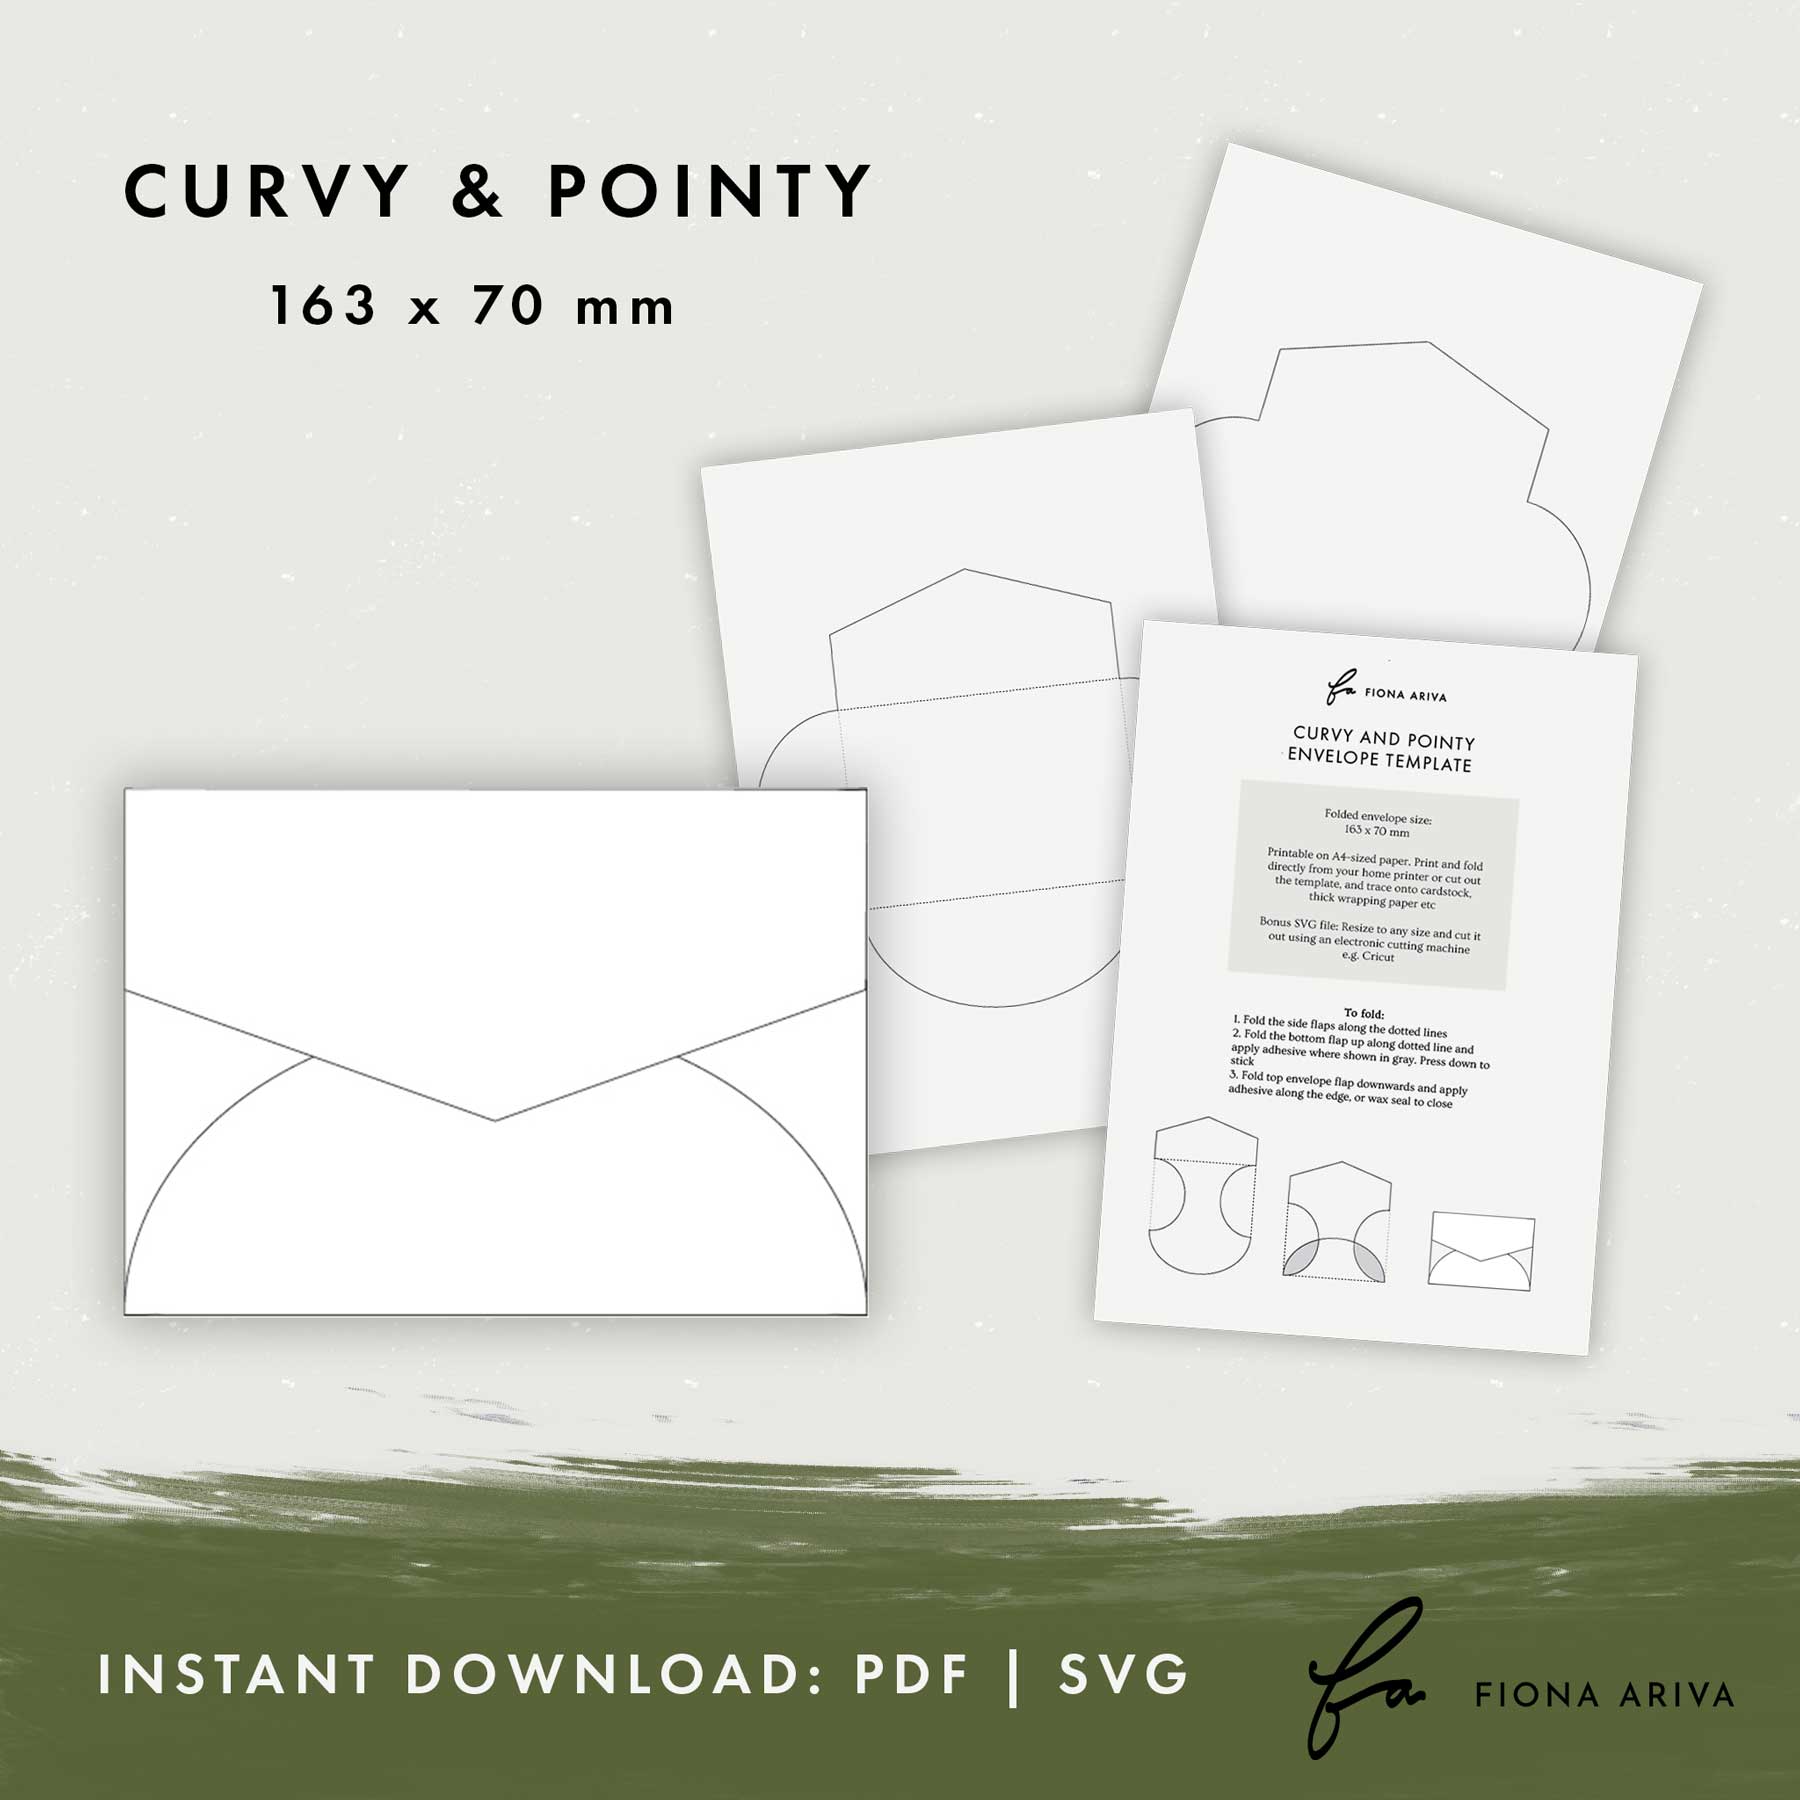 Curvy & Pointy Downloadable Envelope Template 163 x 70mm